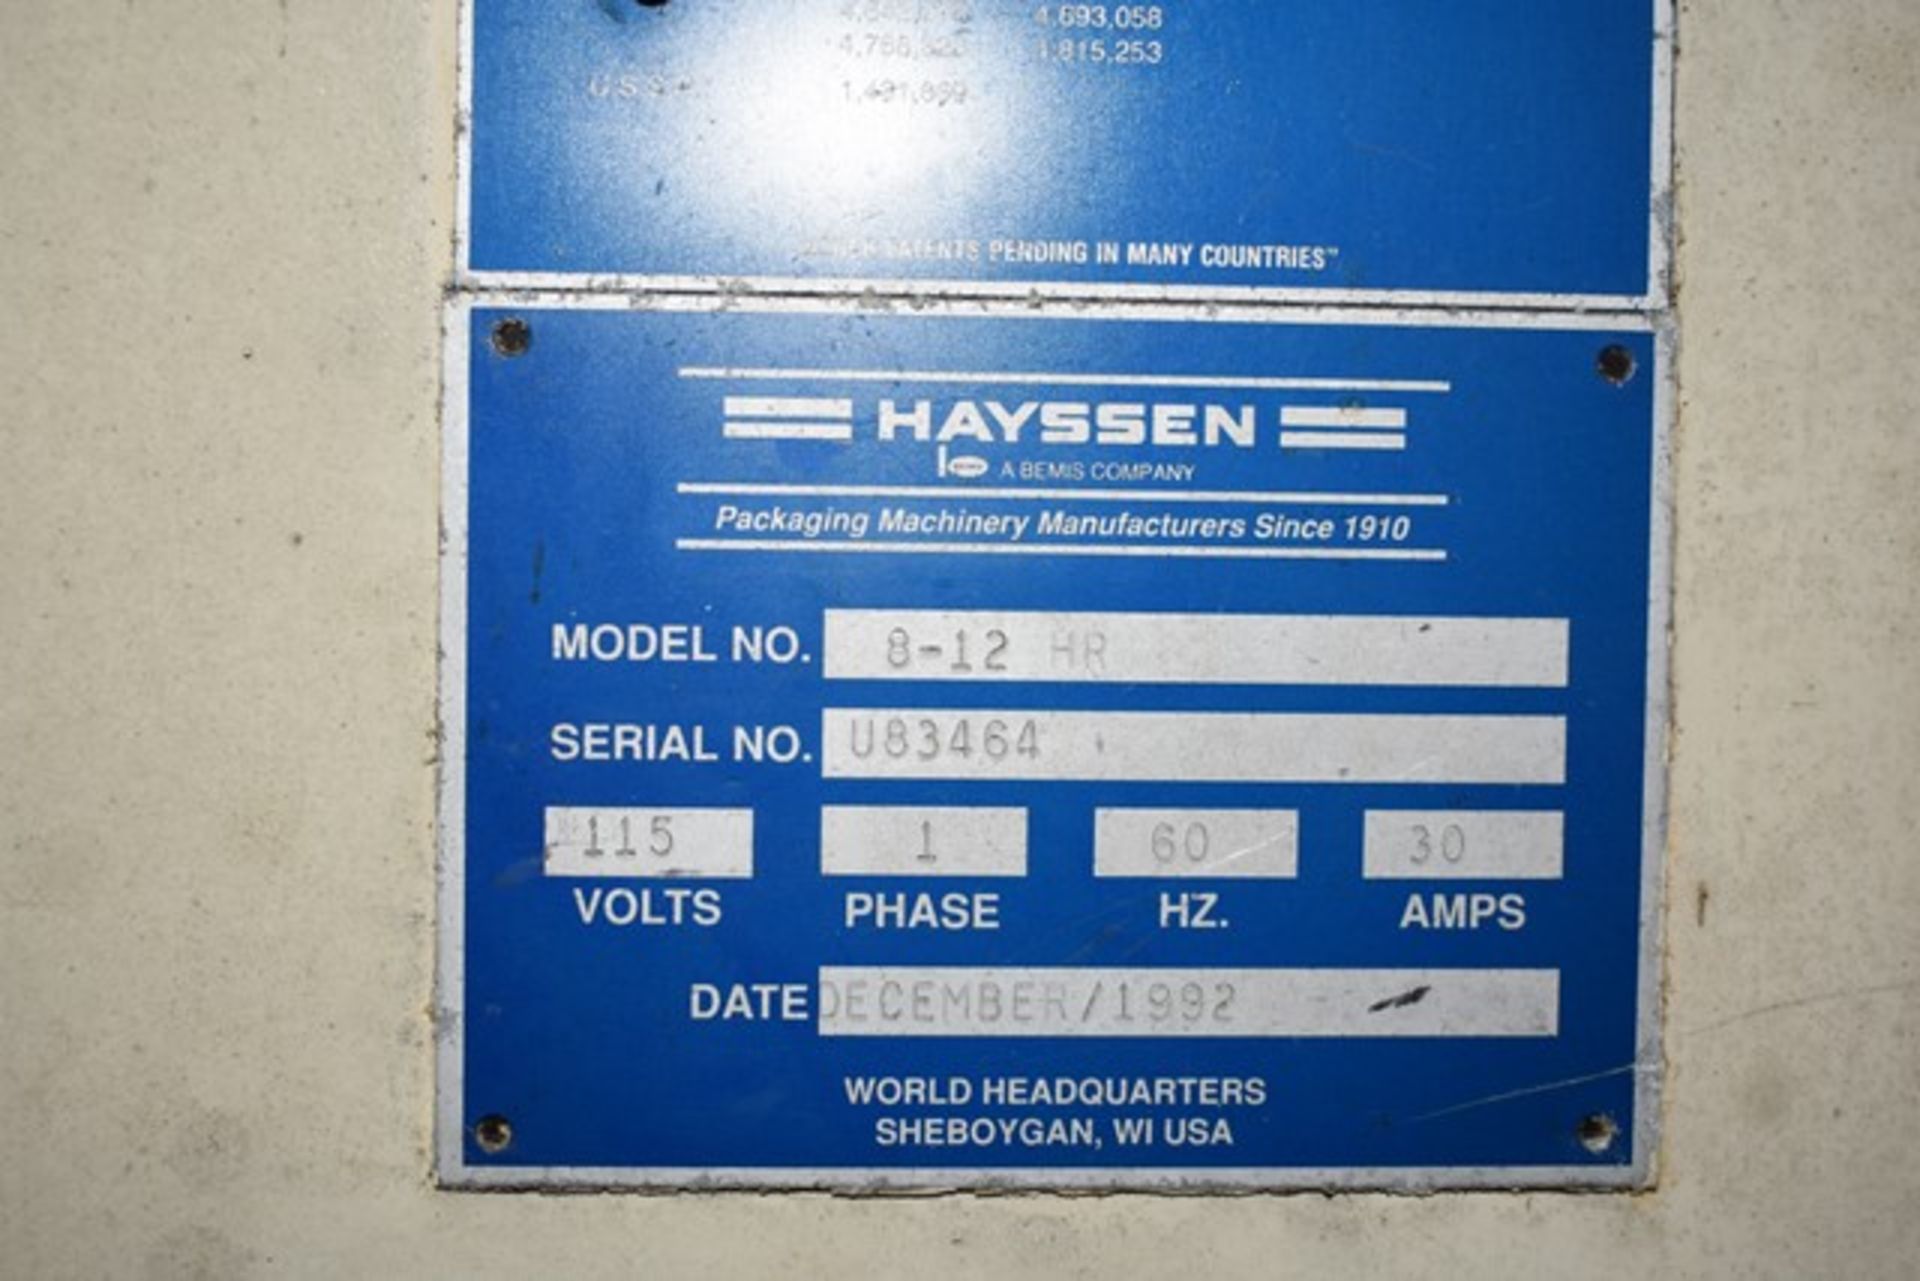 Hayssen FF&S filter pac filler, model 8-16HR, s/n U83464, with Automation Supply Engineering Accu - Image 2 of 2